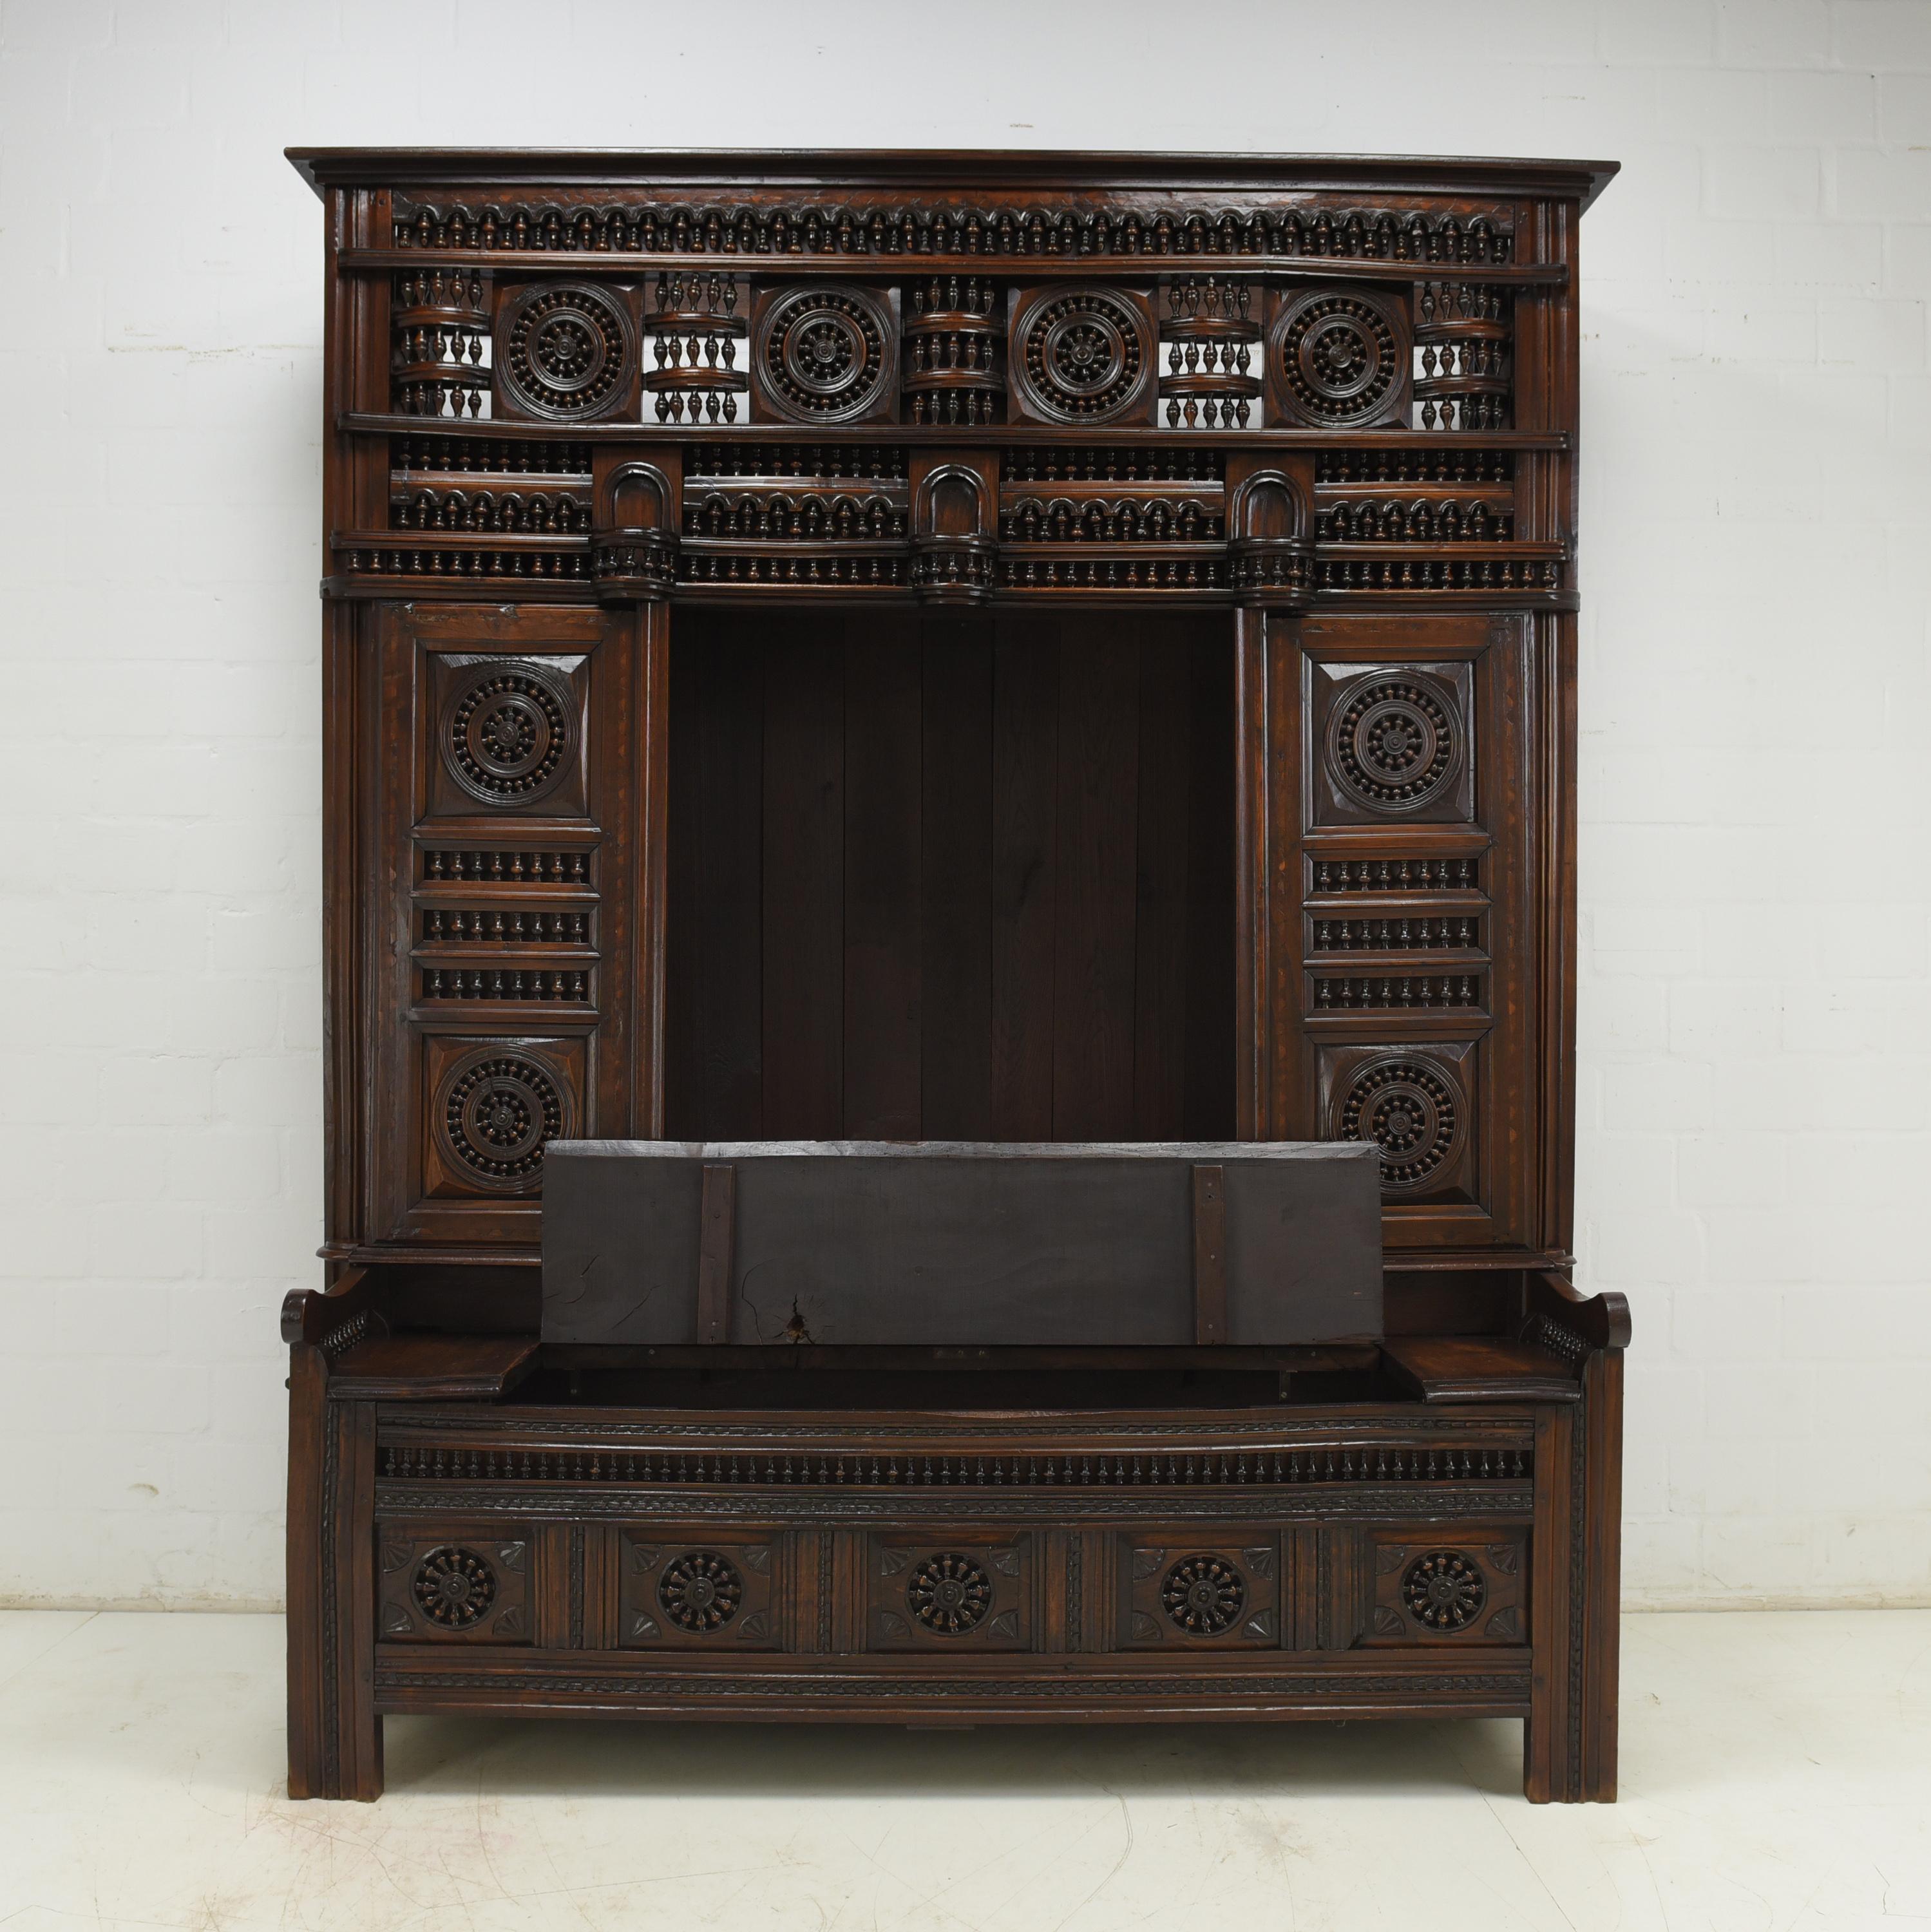 Large Breton cupboard with bench restored around 1900 chestnut

Features:
Four sliding door elements that can be moved separately
Foldable bench with storage space
Very complex processing
Decorated with hundreds of small turned